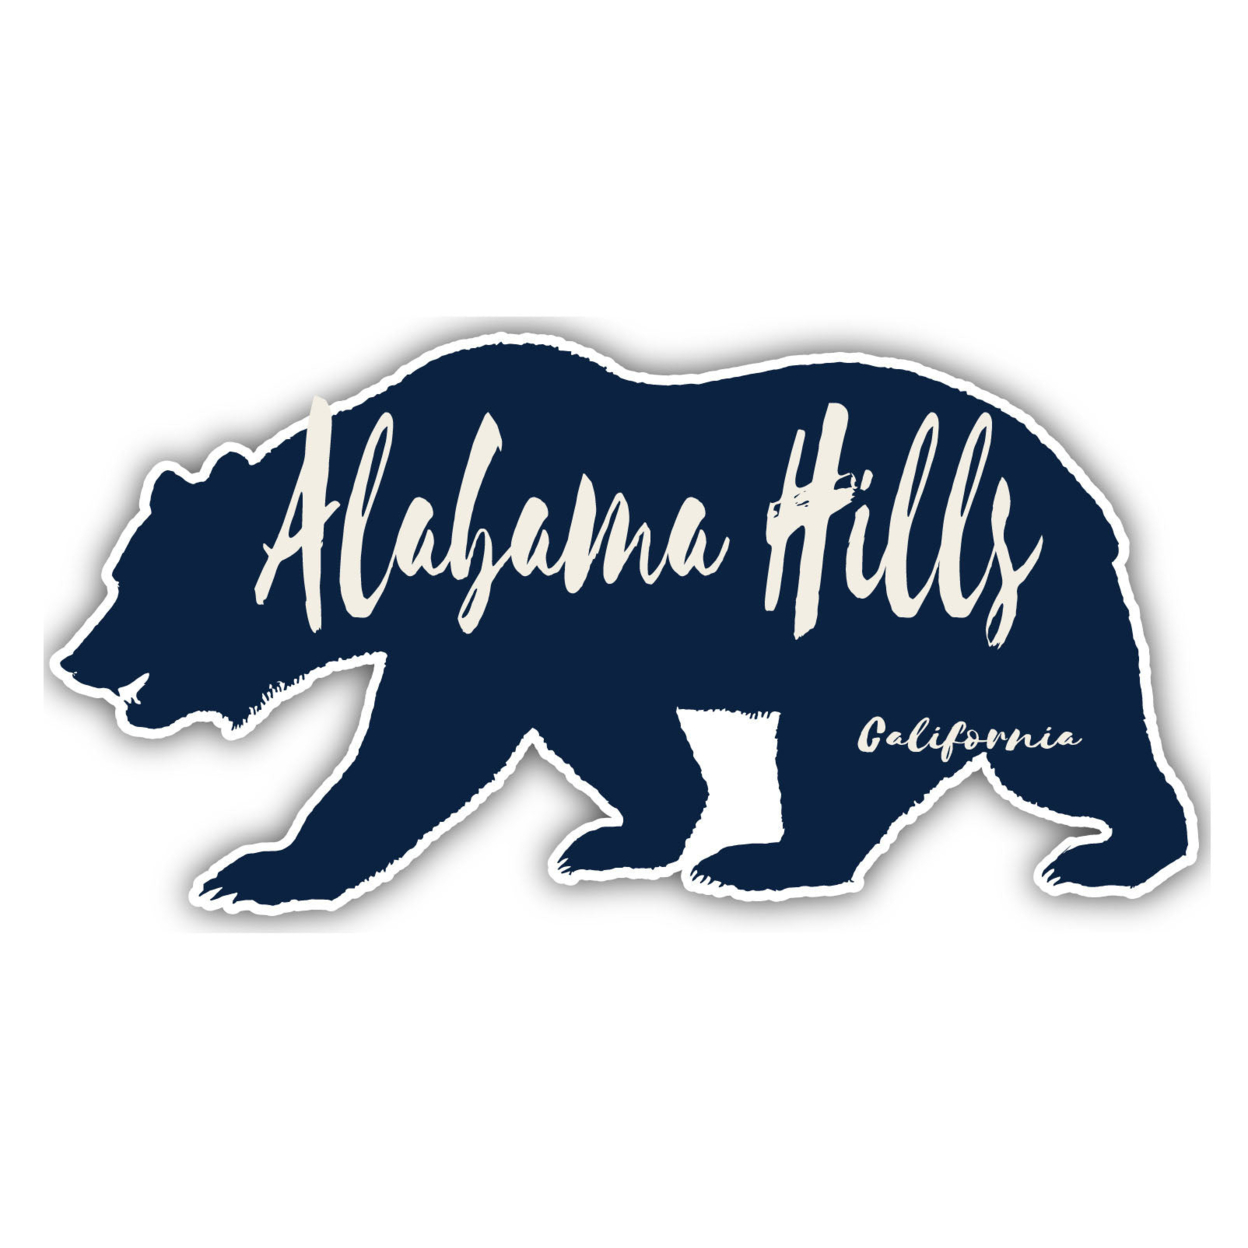 Alabama Hills California Souvenir Decorative Stickers (Choose Theme And Size) - Single Unit, 10-Inch, Great Outdoors